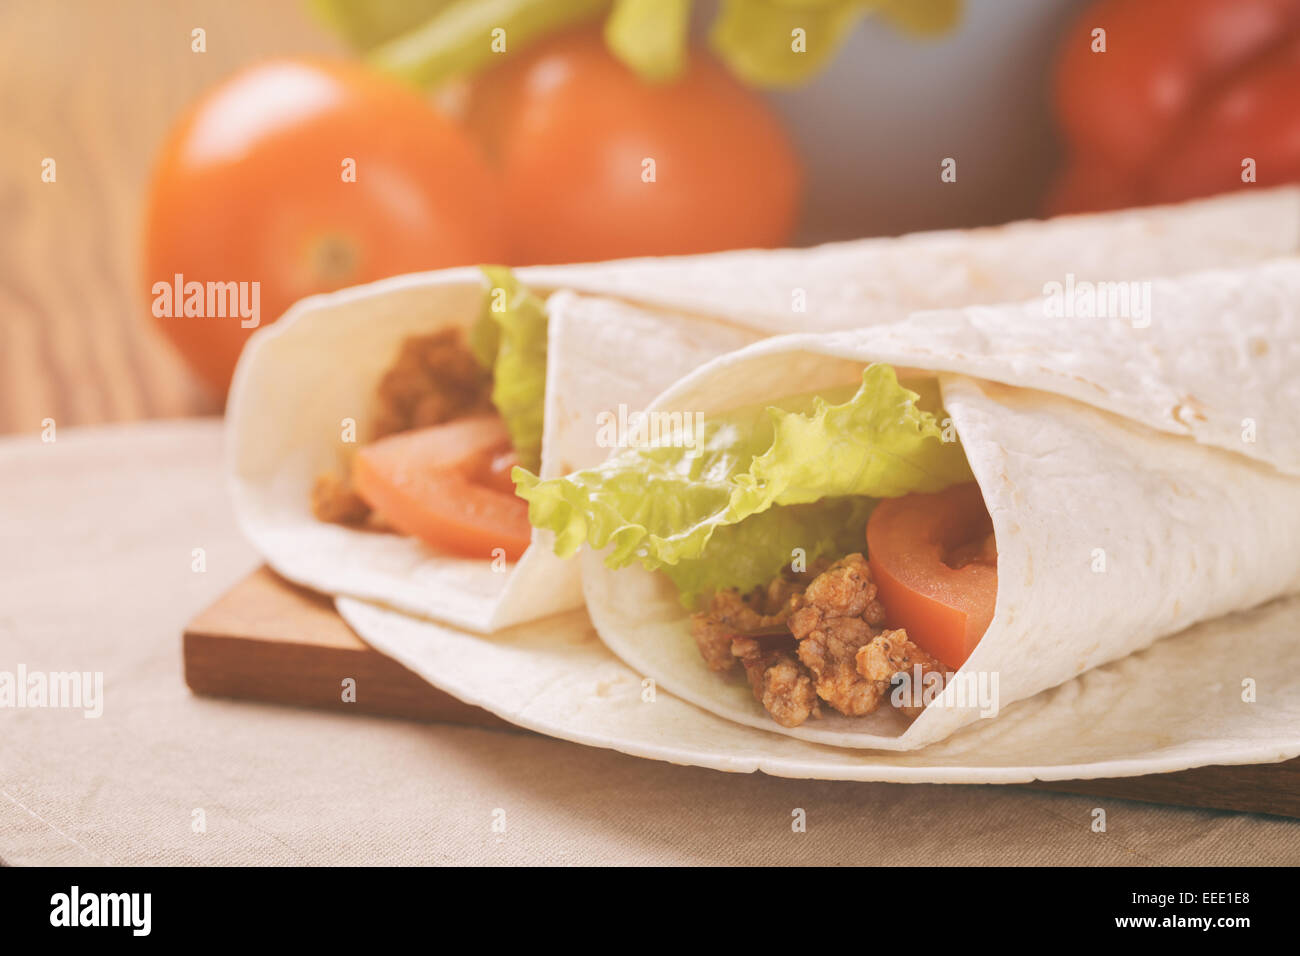 Fresh tortilla wraps with meat and vegetables, vintage toned Stock Photo